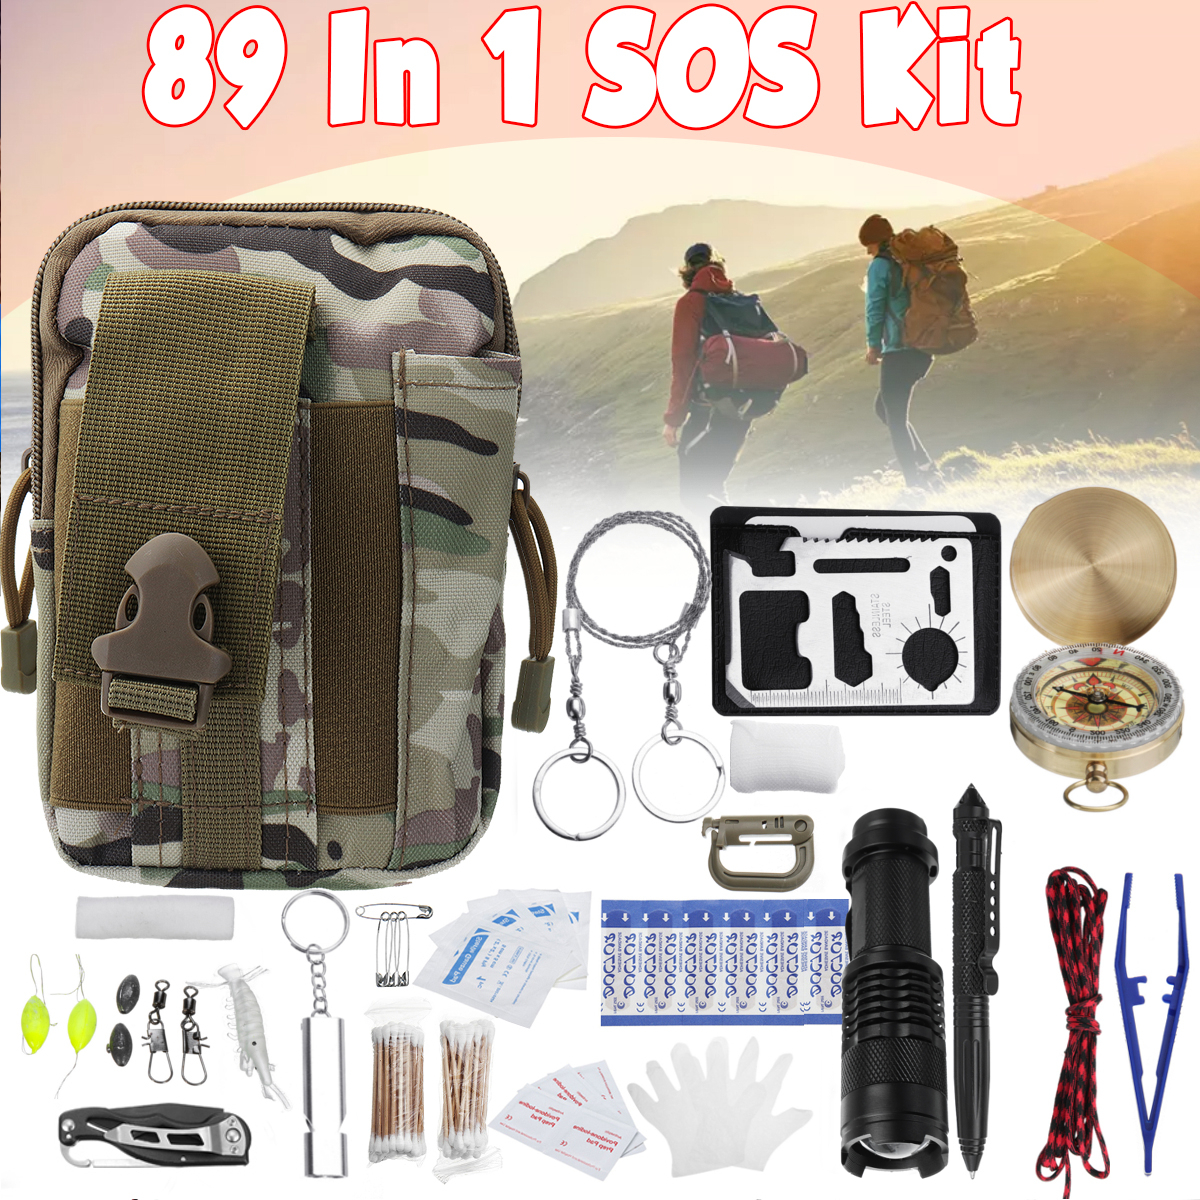 Emergency Survival SOS Kit EDC Tools Gadget Set Camping First Aid Emergency Collection